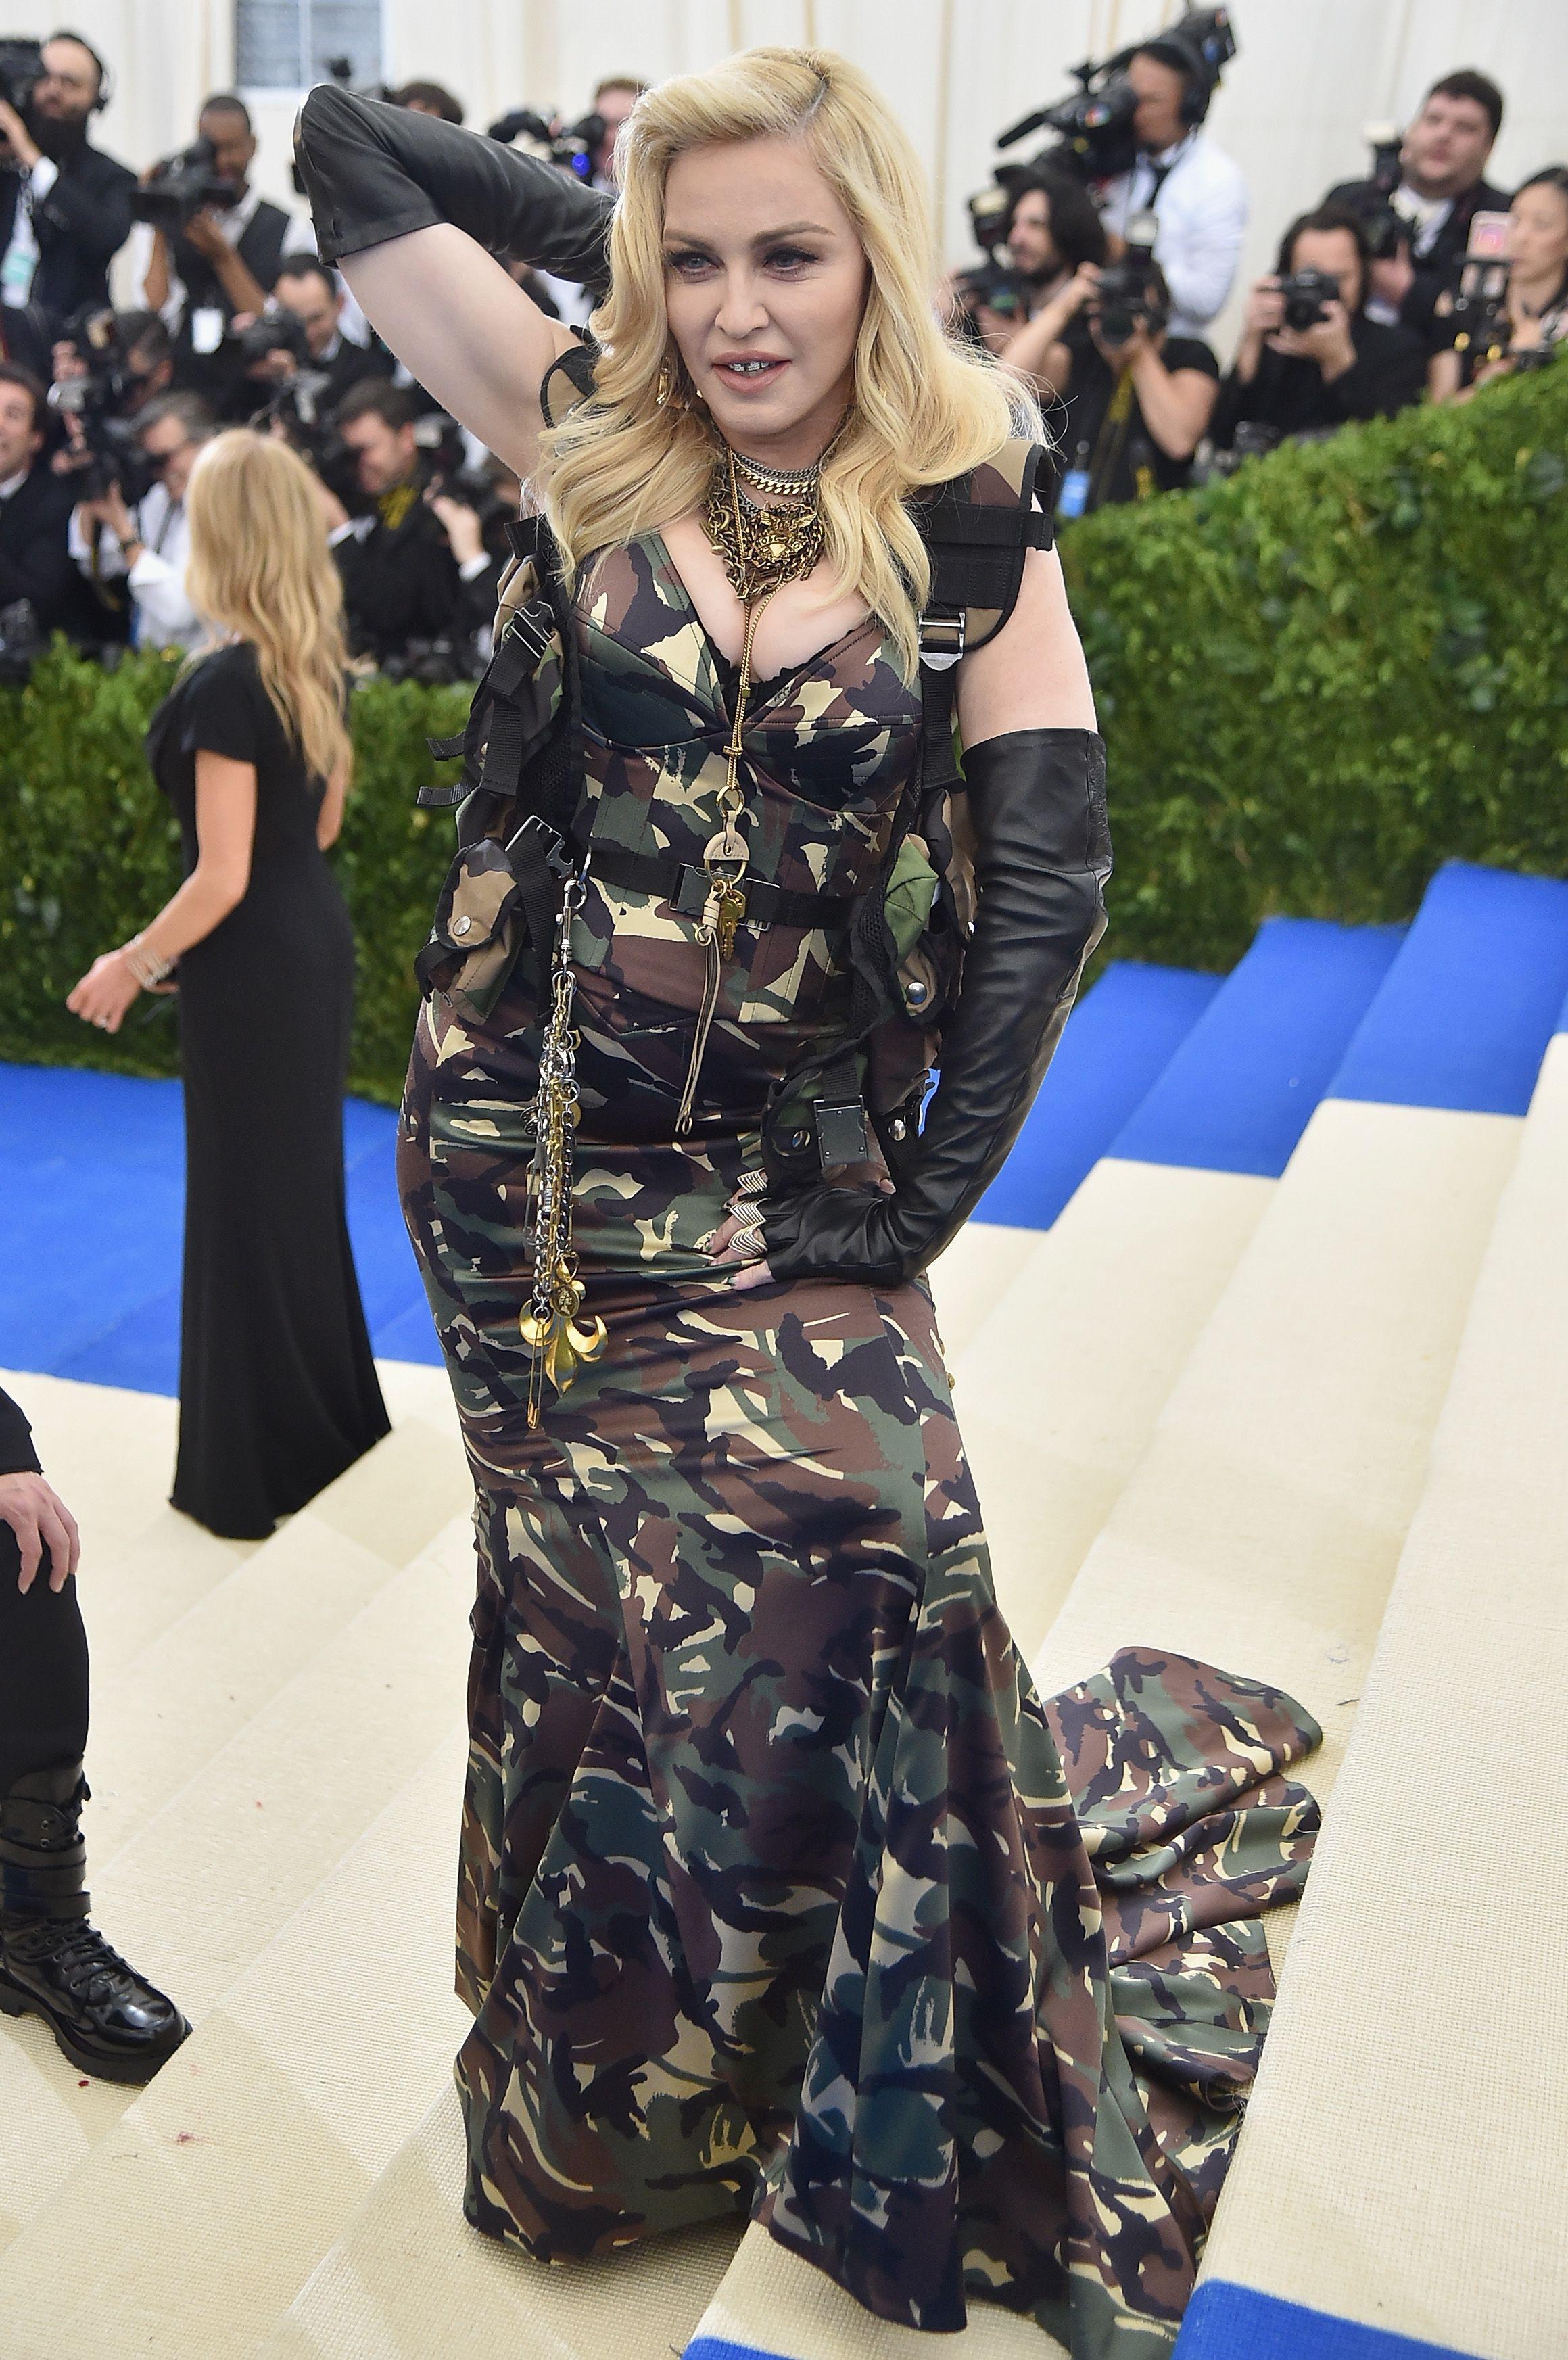 Madonna arrived at the 2017 Met Gala ready